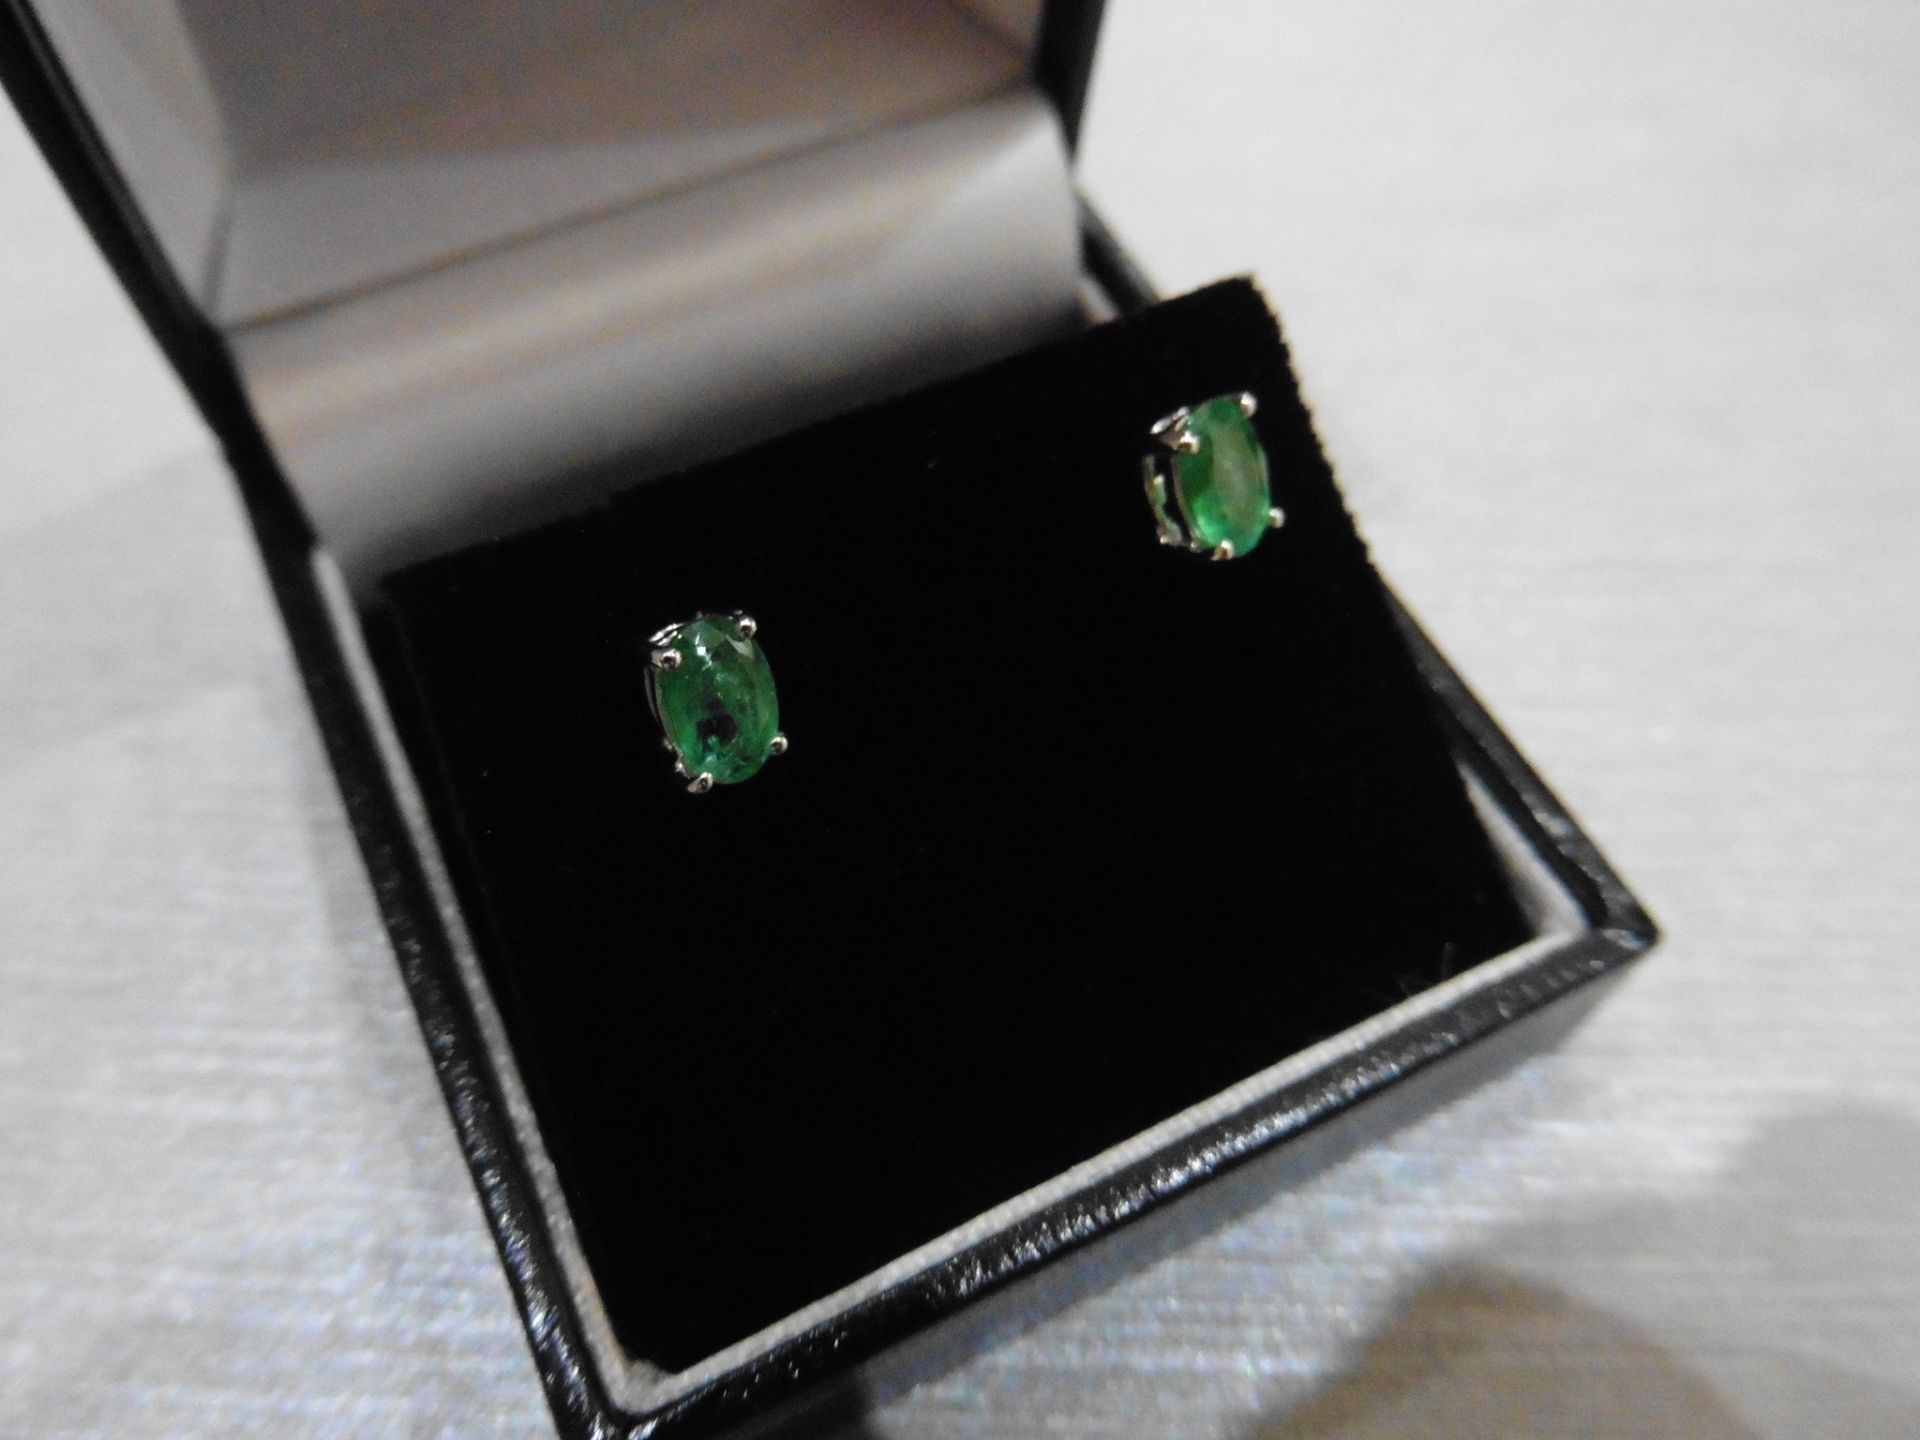 0.60Ct Emerald Stud Style Earrings Set In 9Ct White Gold. - Image 3 of 3